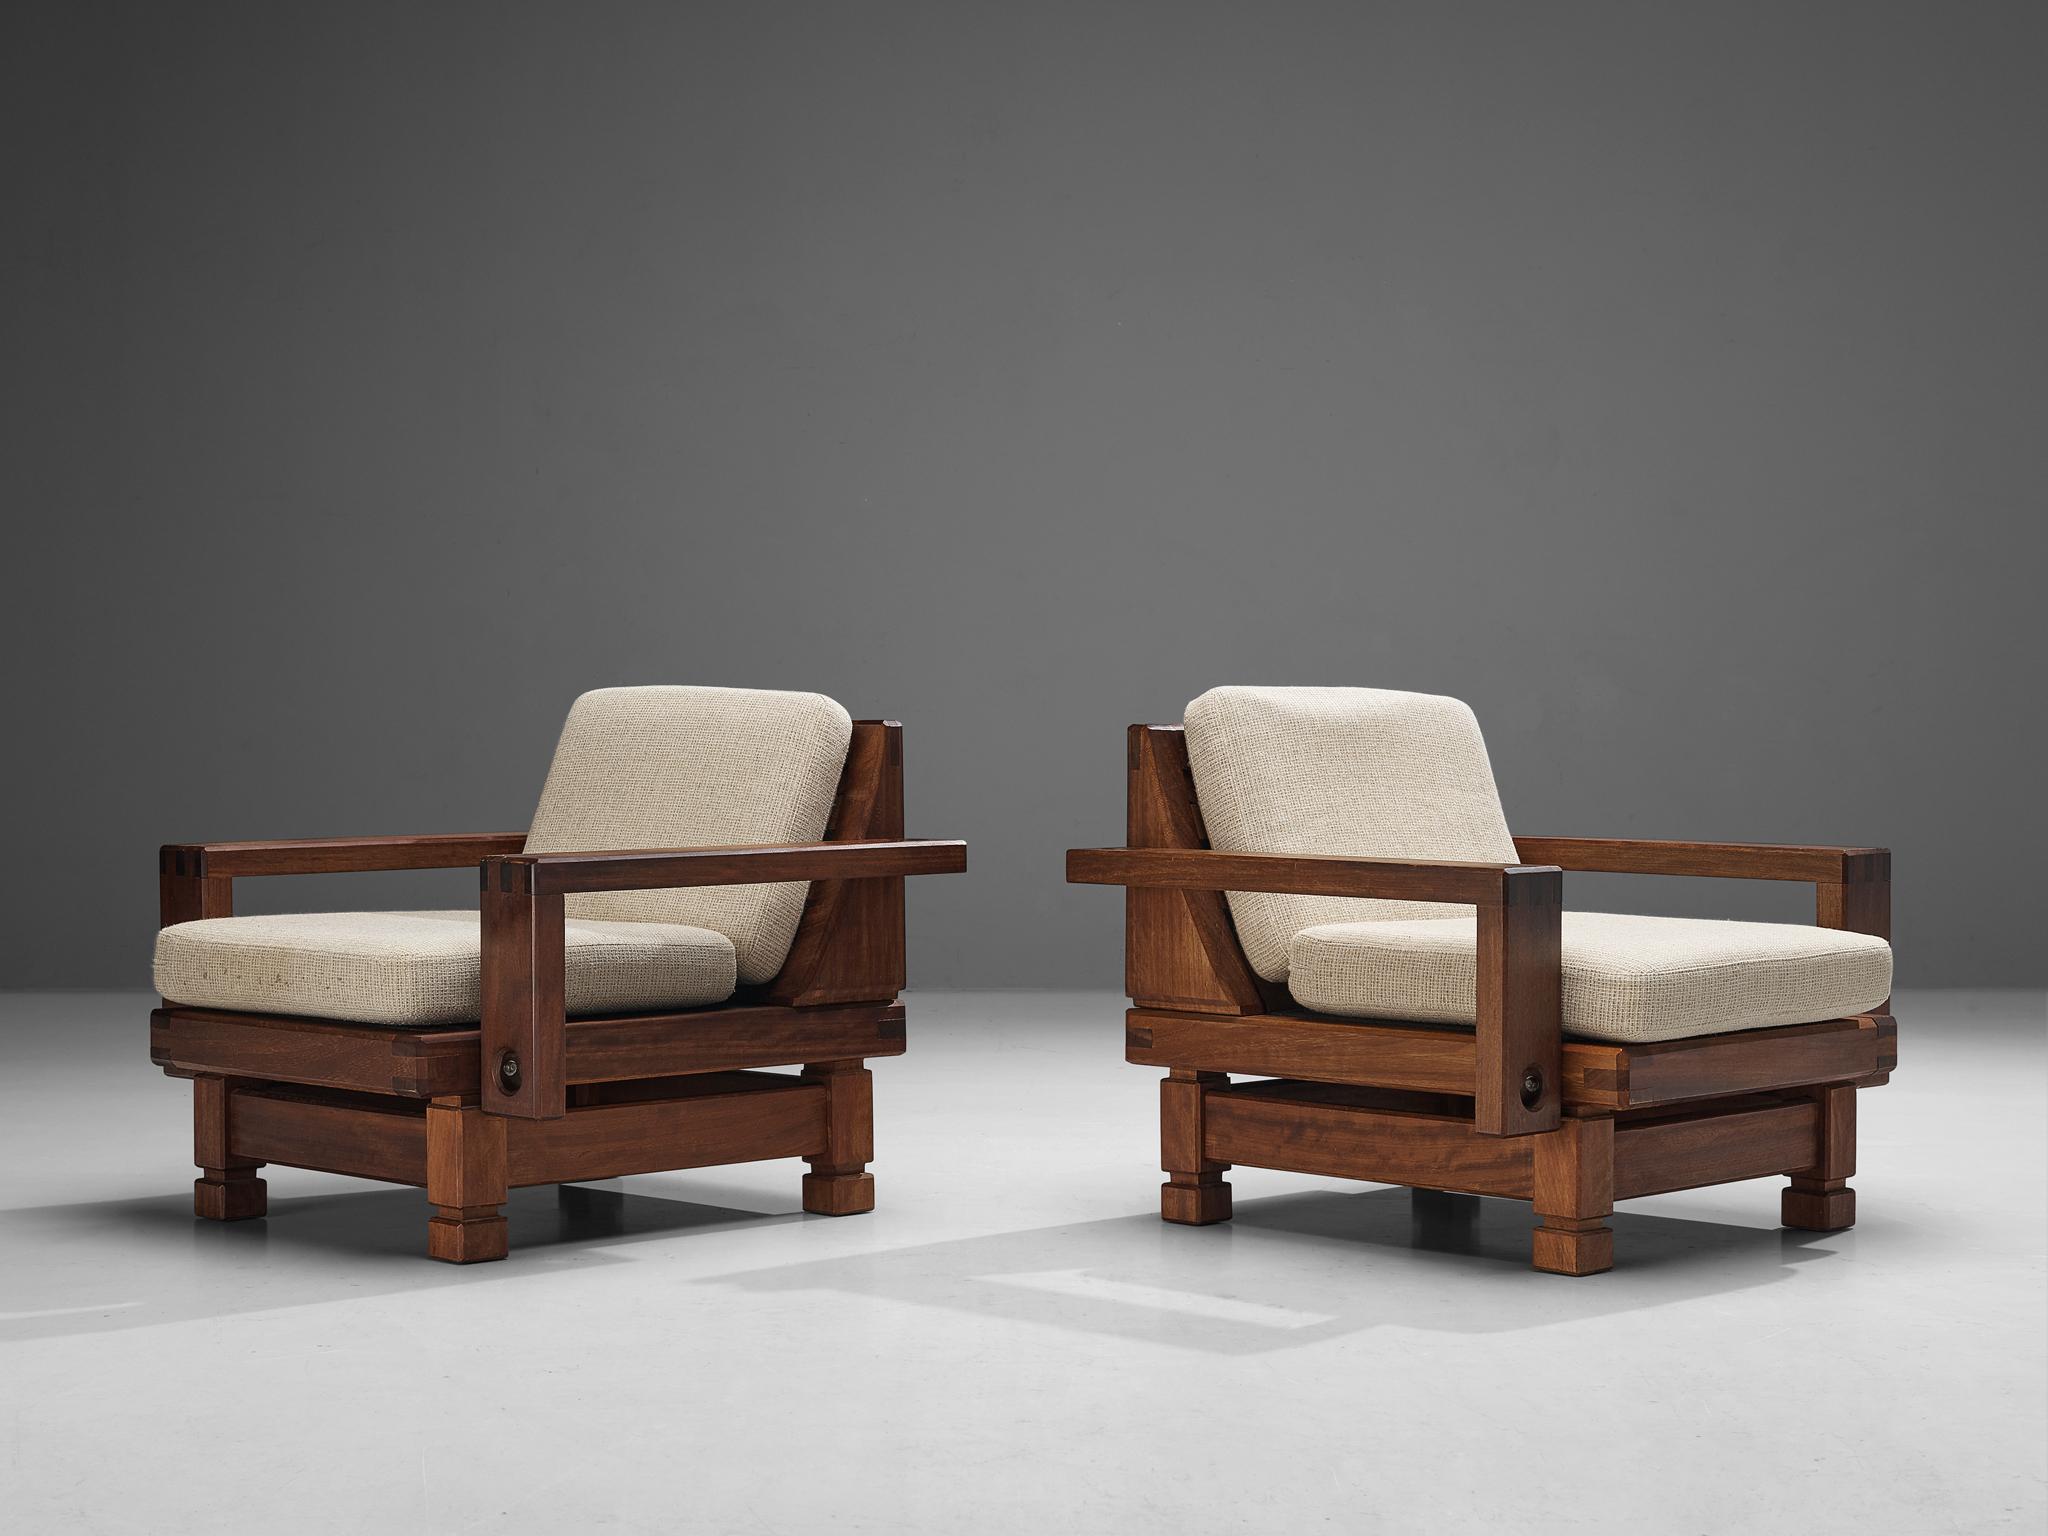 Pair of lounge chairs, teak, okoume, fabric, France, 1960s.

The design conceals an evolved rustic character with great quality of elegance. This is discernible in the wooden frame executed in teak which is based on a construction of sharp